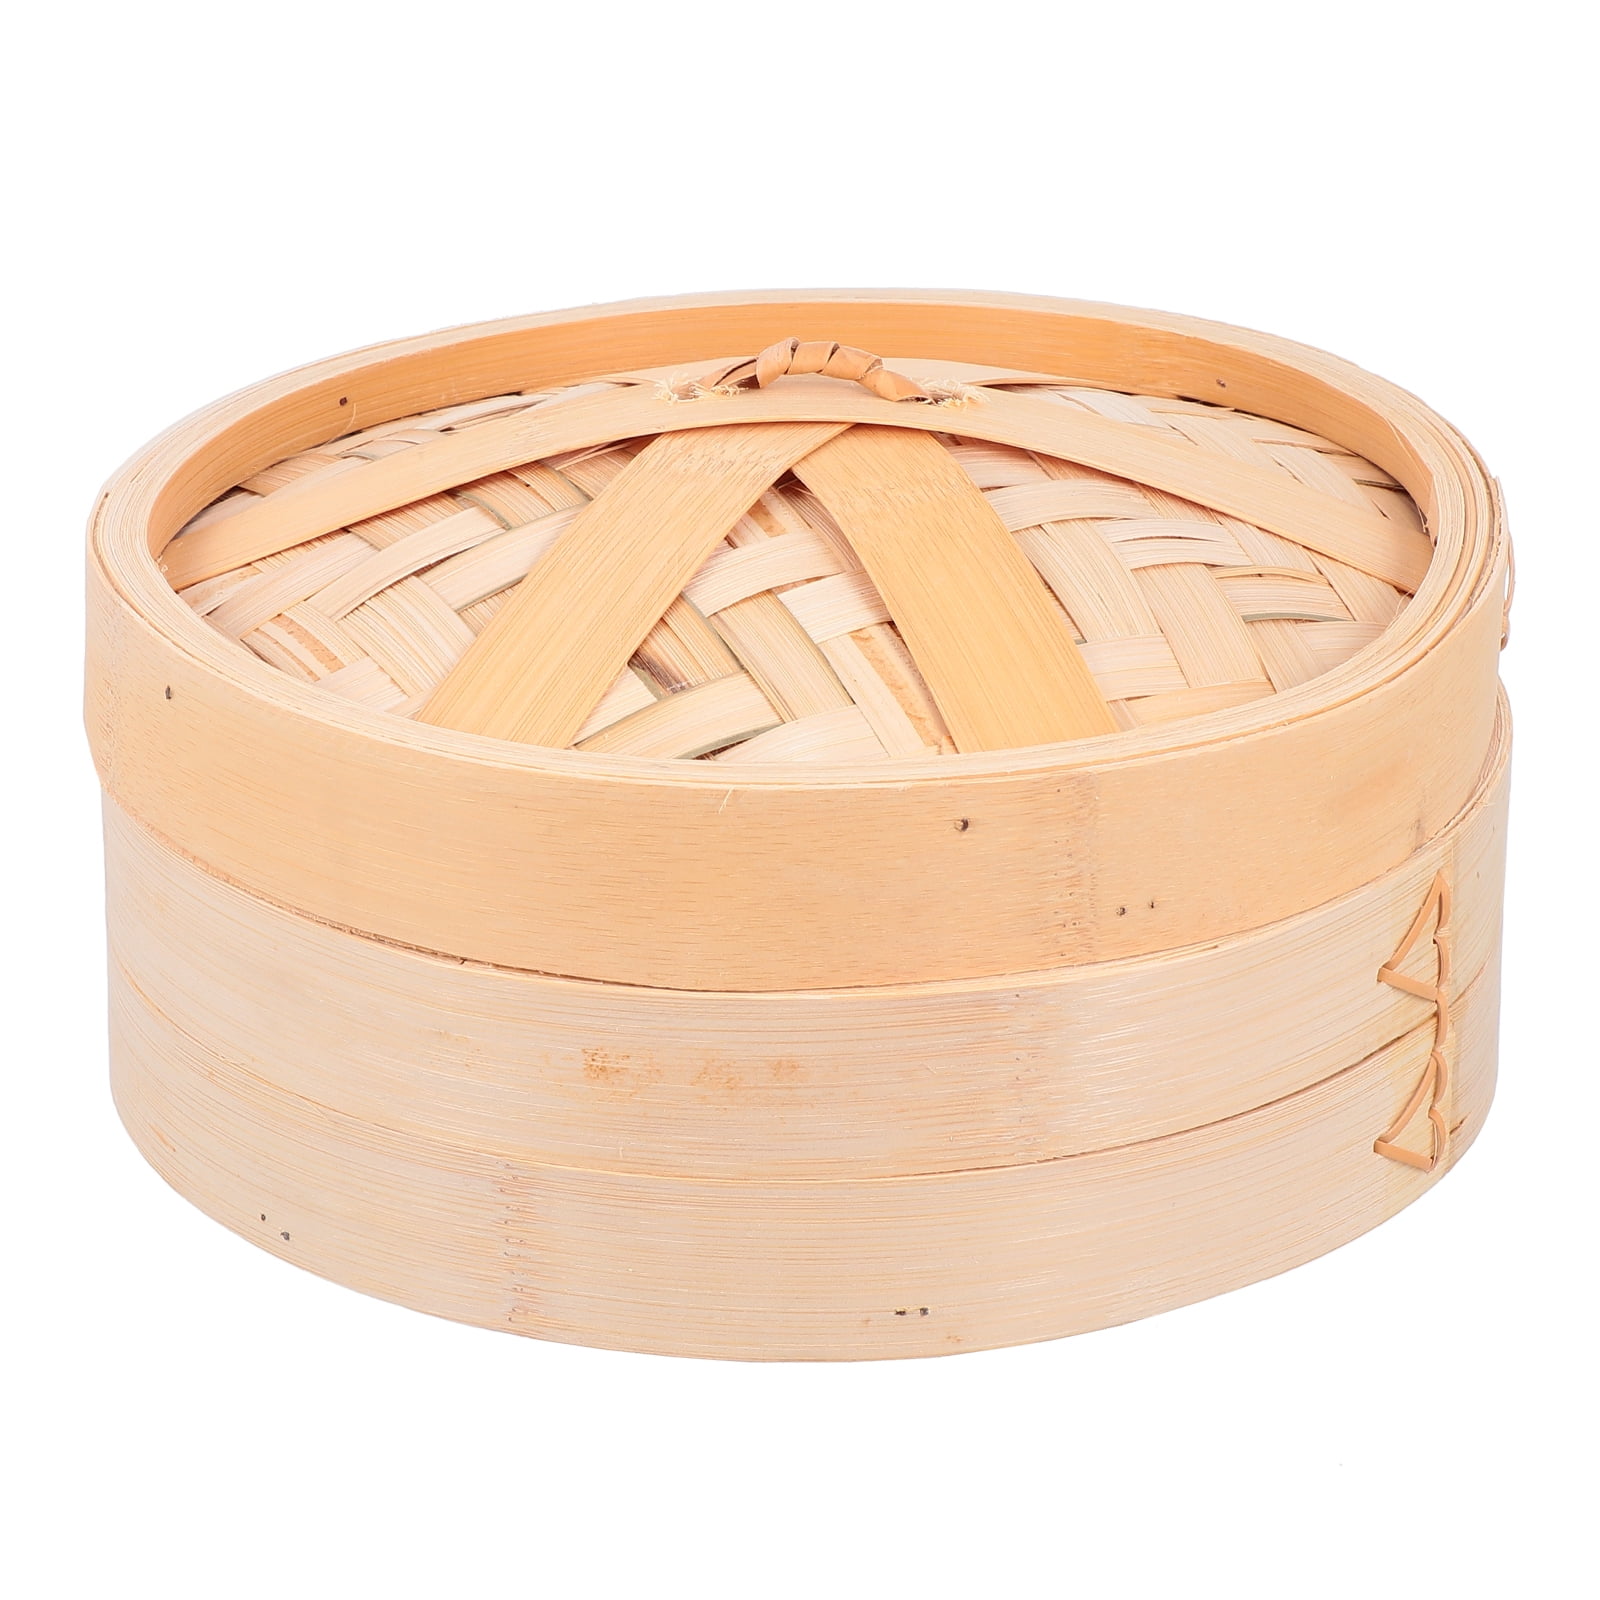 Bamboo Mini Steamer Basket Bowl with Lid 3" Wide x 2" Tall BambooMN ⭐️⭐️⭐️⭐️⭐️ 